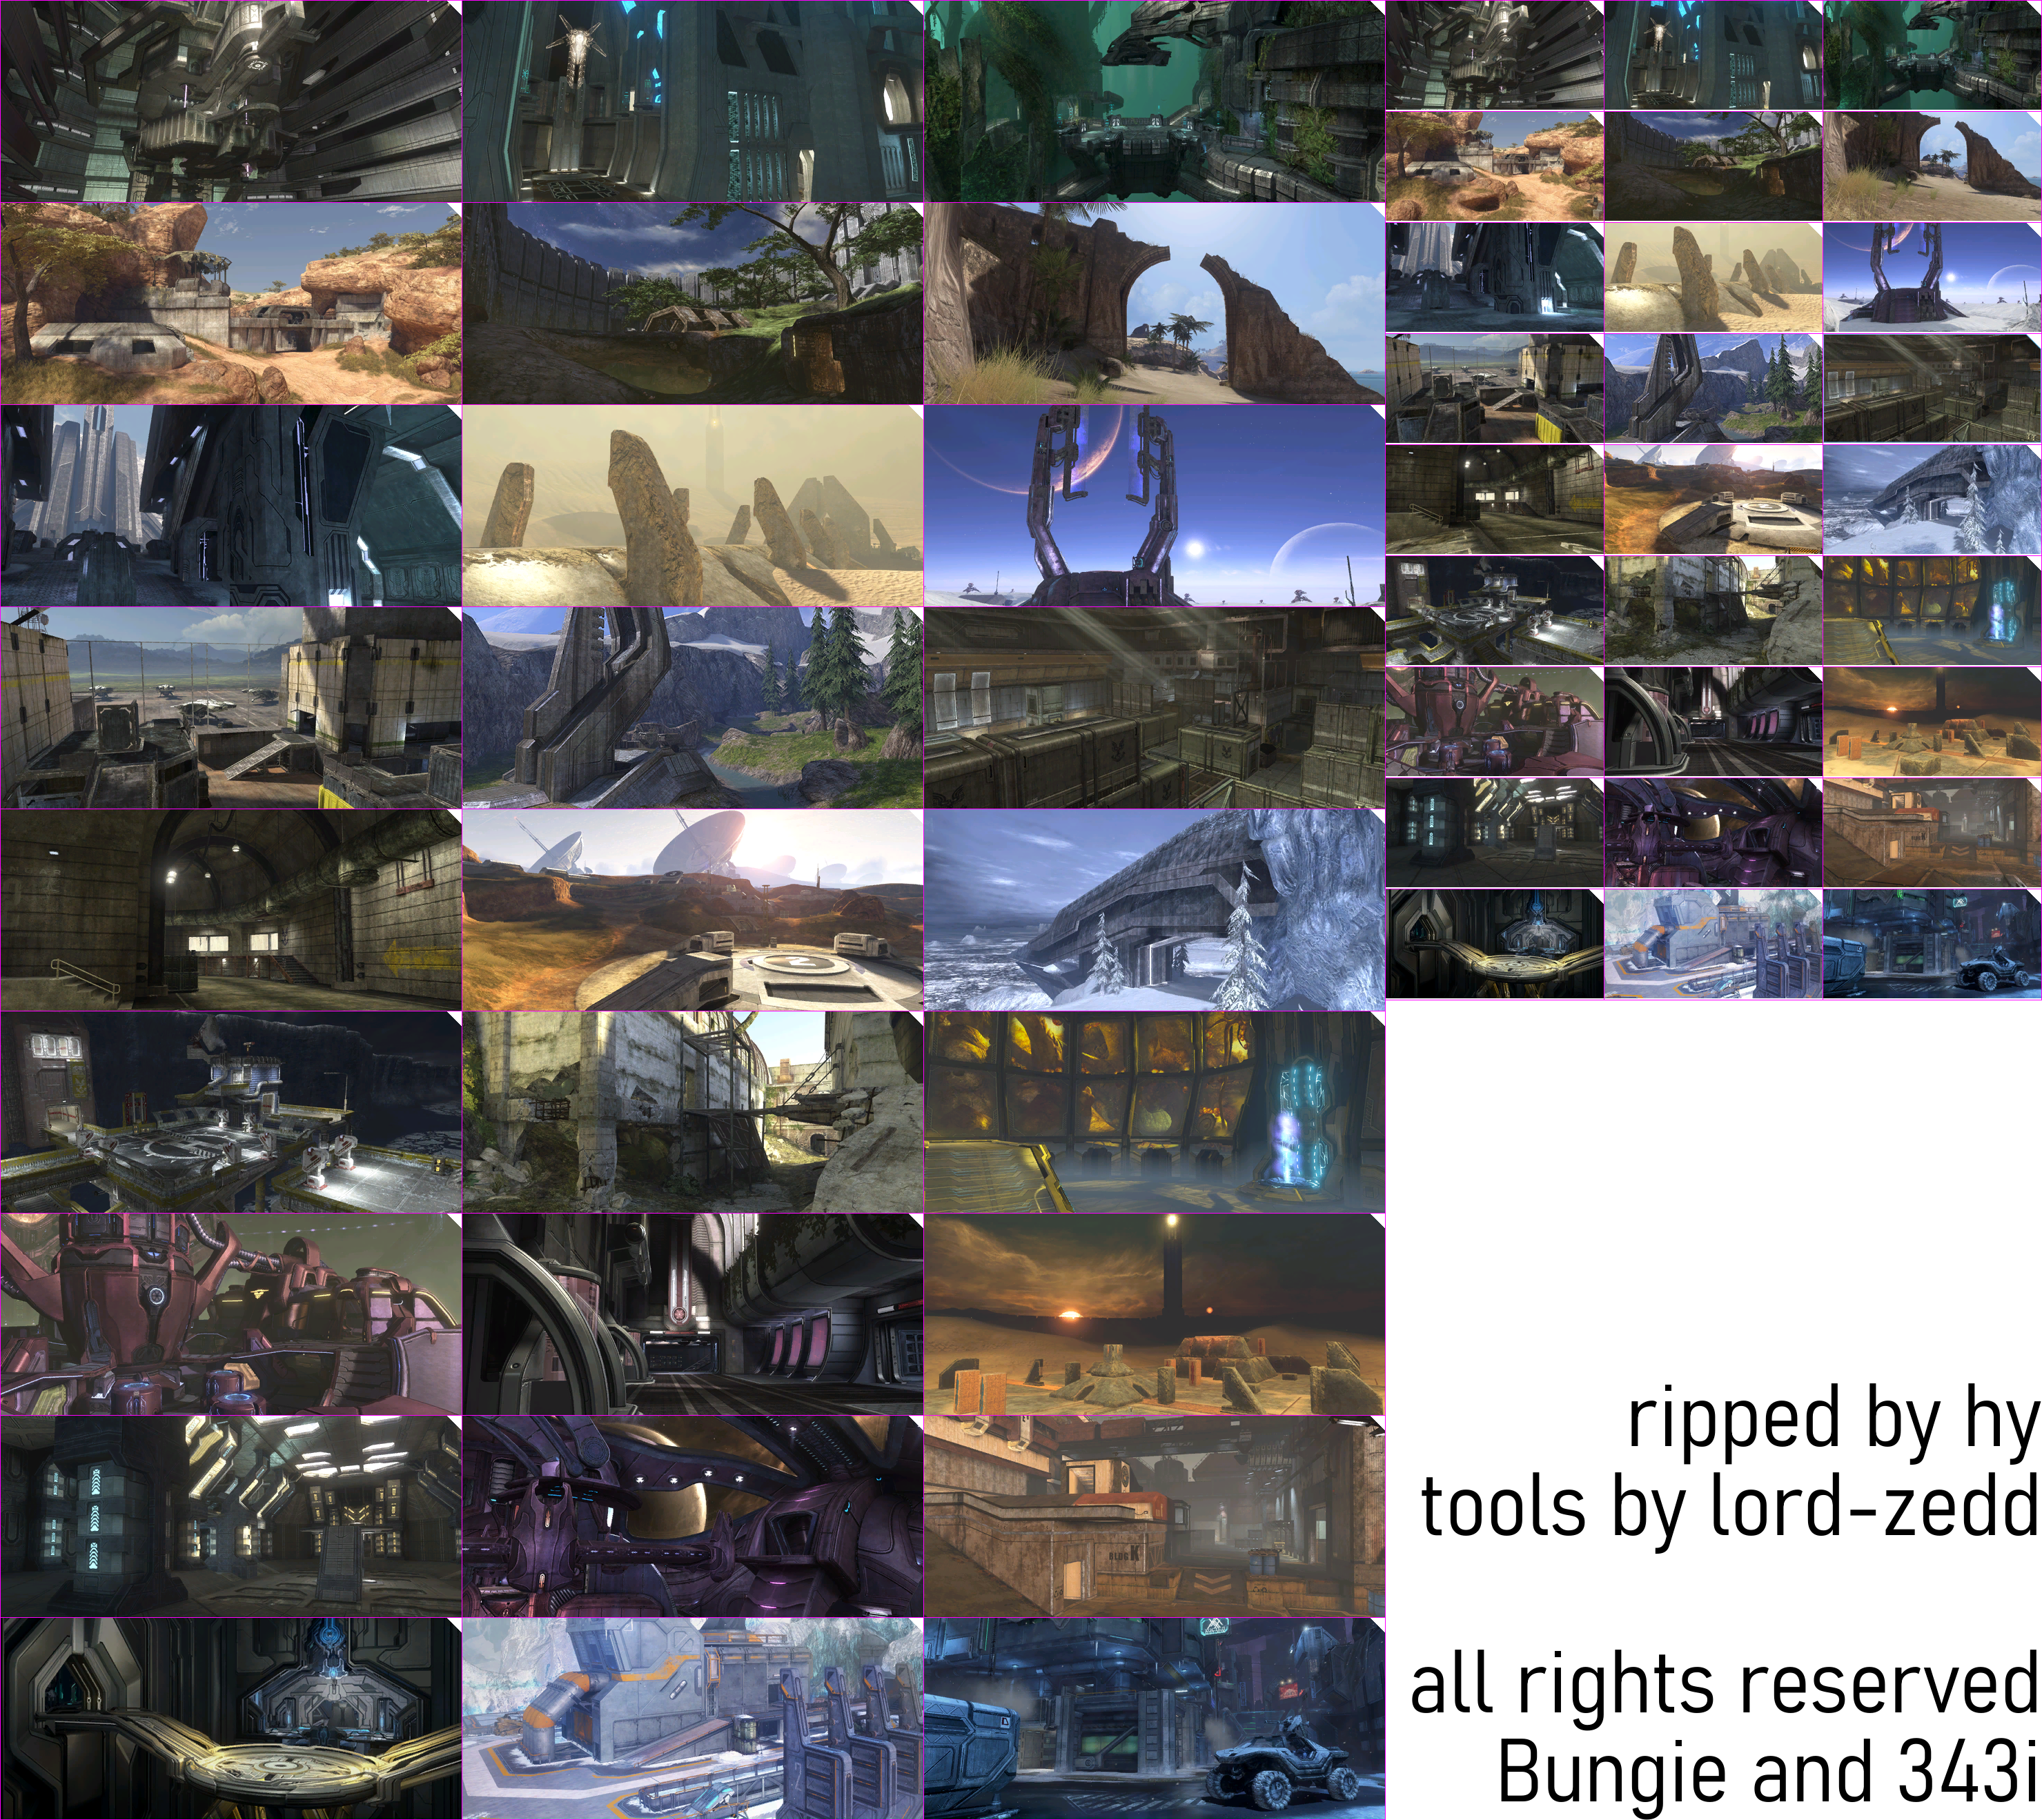 Halo: The Master Chief Collection - Halo 3 Multiplayer Level Previews